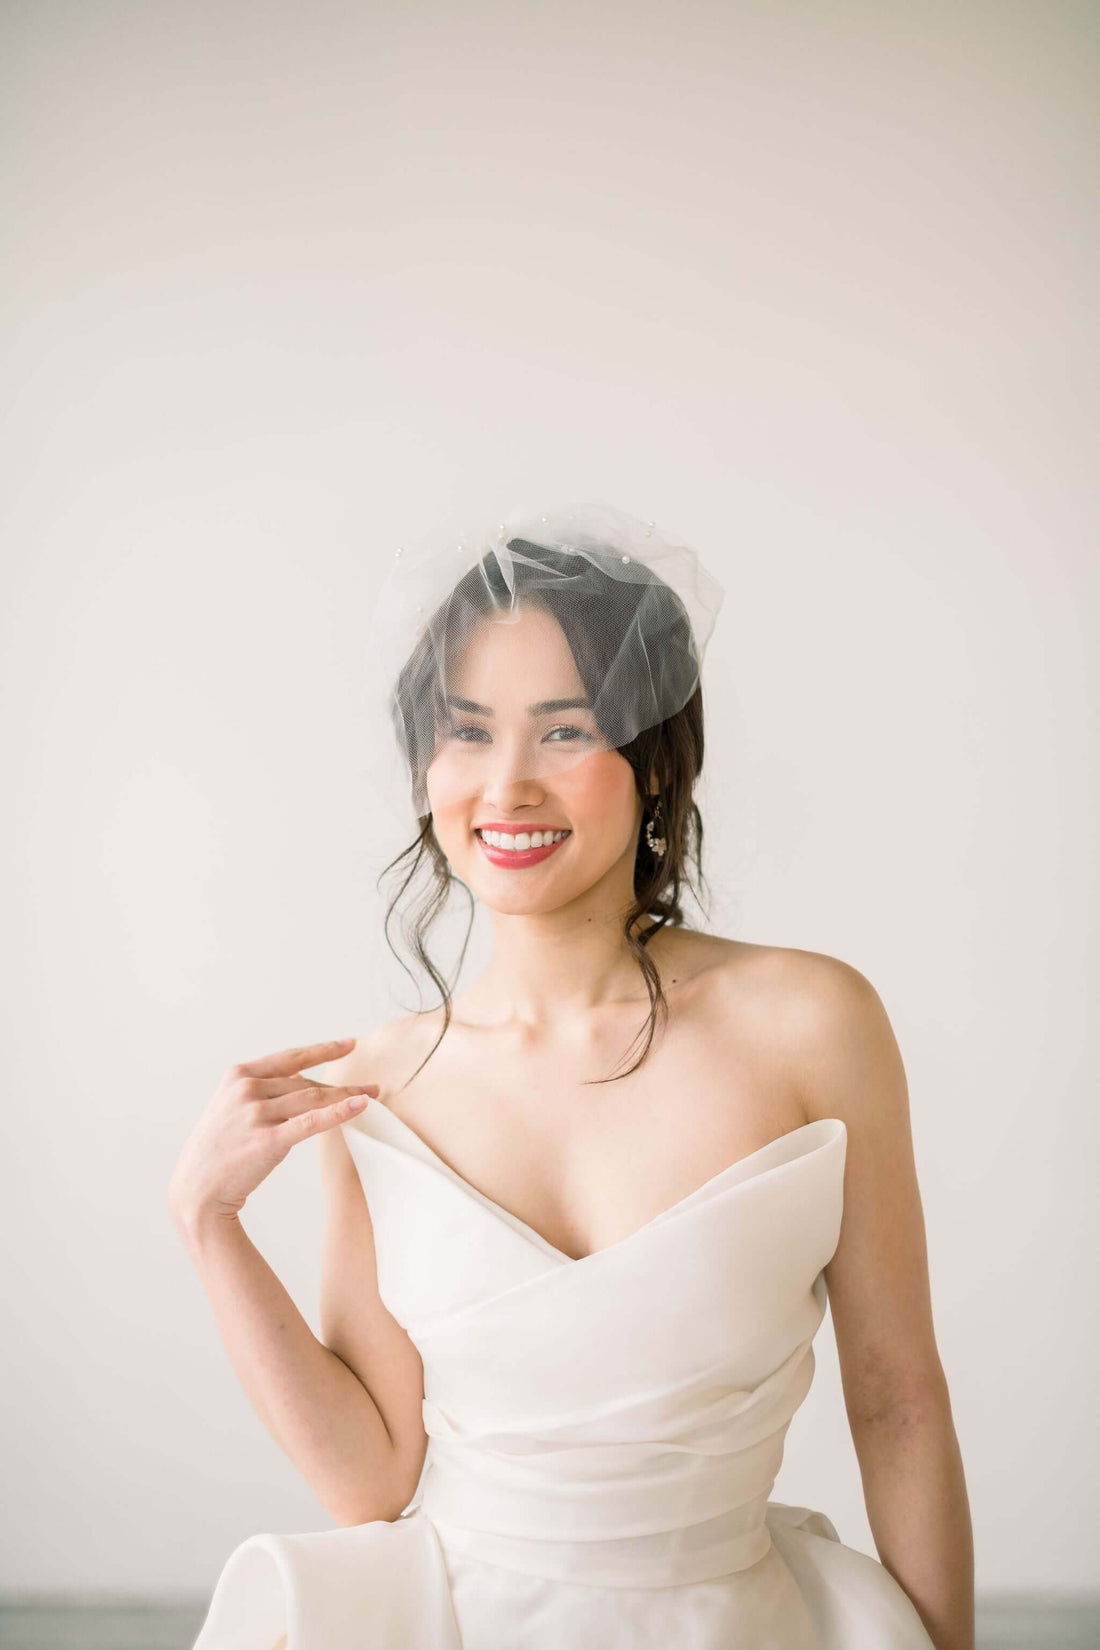 Featured product: Bridal tulle birdcage veil with pearl accents Tessa Kim